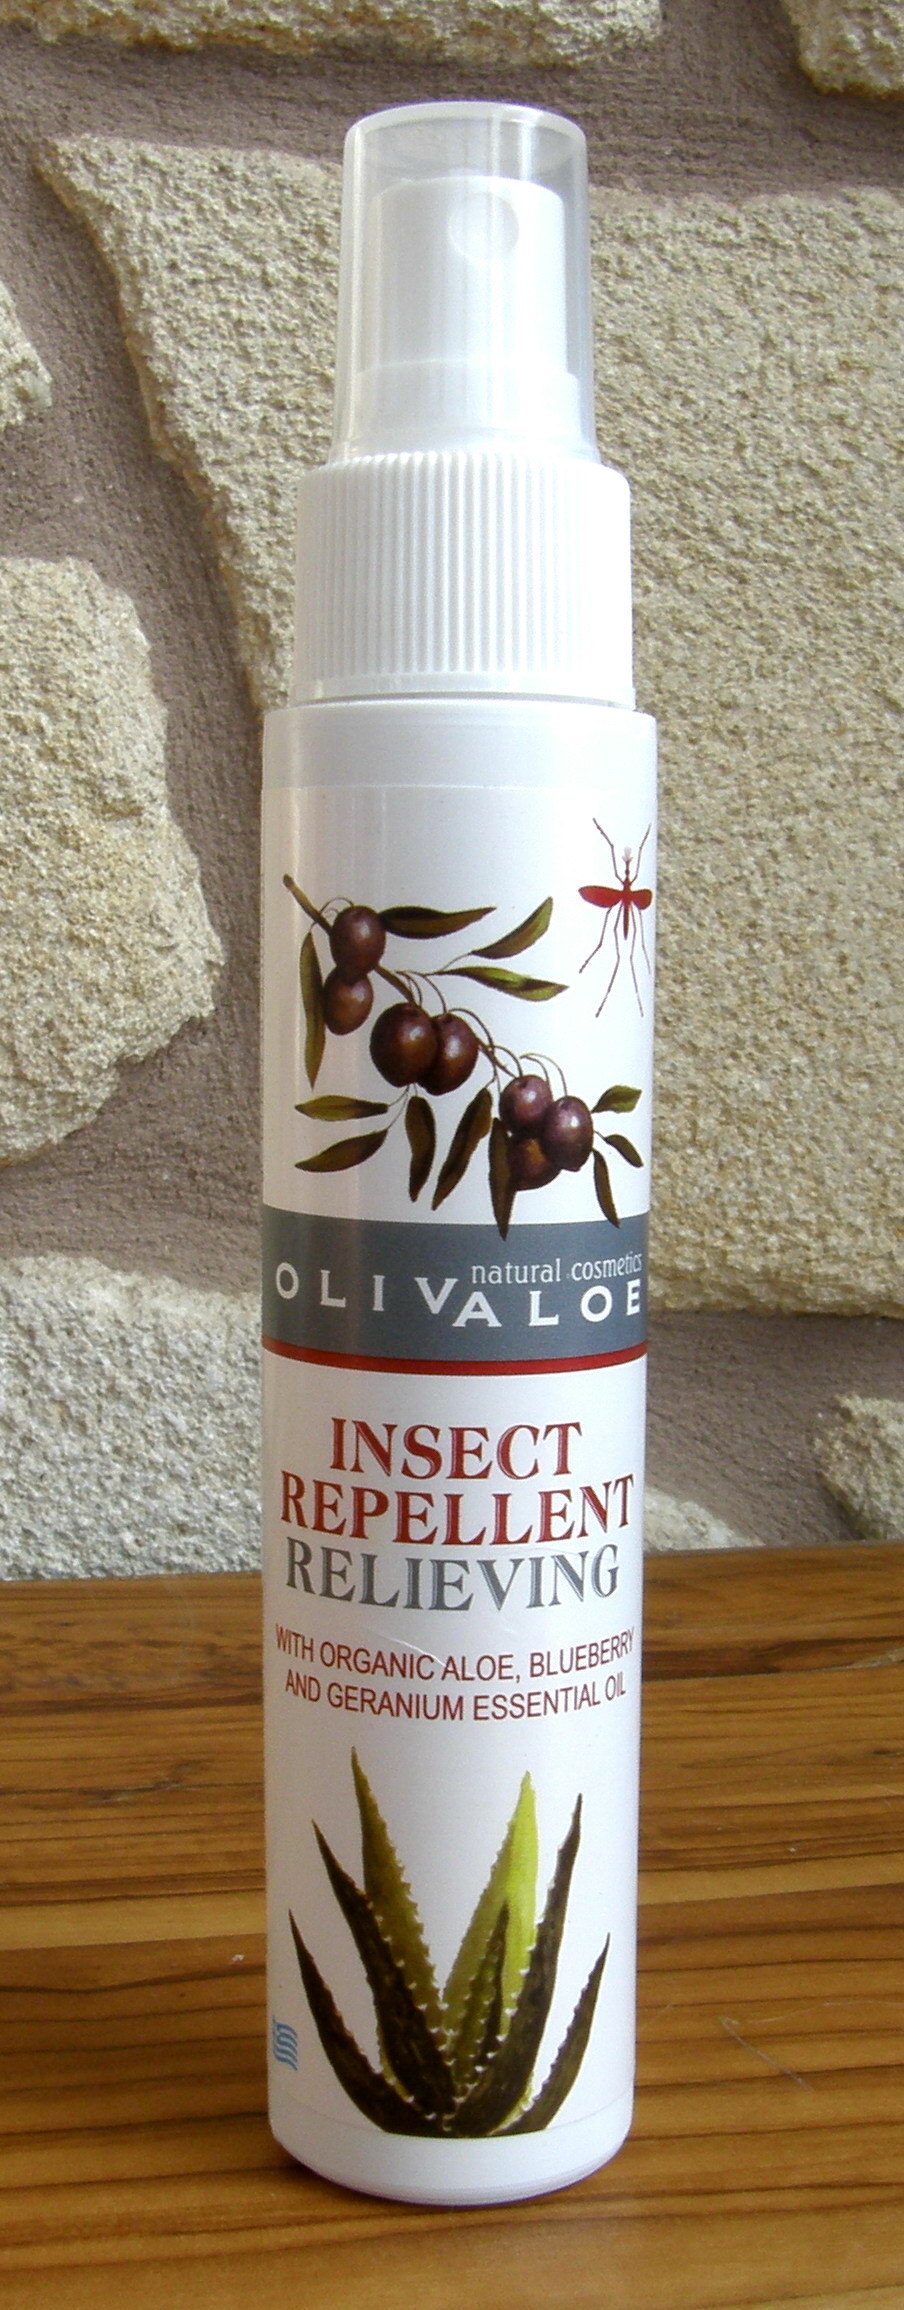 Insect Repellent Relieving